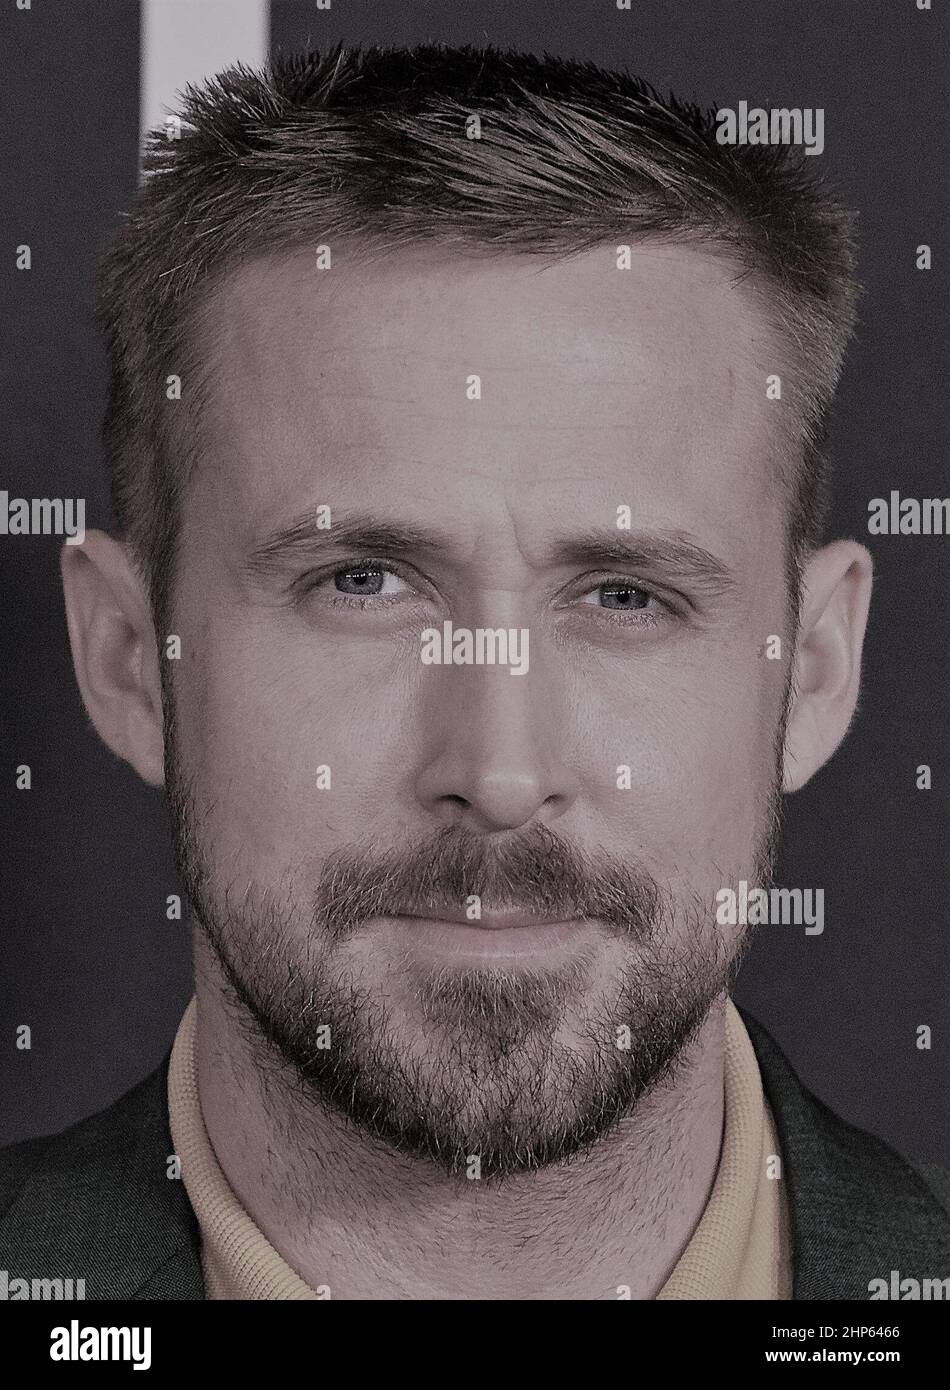 American actor Ryan Gosling arrives on the red carpet for the premiere of the film 'First Man' at the Smithsonian National Air and Space Museum Thursday, Oct. 4, 2018 in Washington. The film is based on the book by Jim Hansen, and chronicles the life of NASA astronaut Neil Armstrong from test pilot to his historic Moon landing. Stock Photo